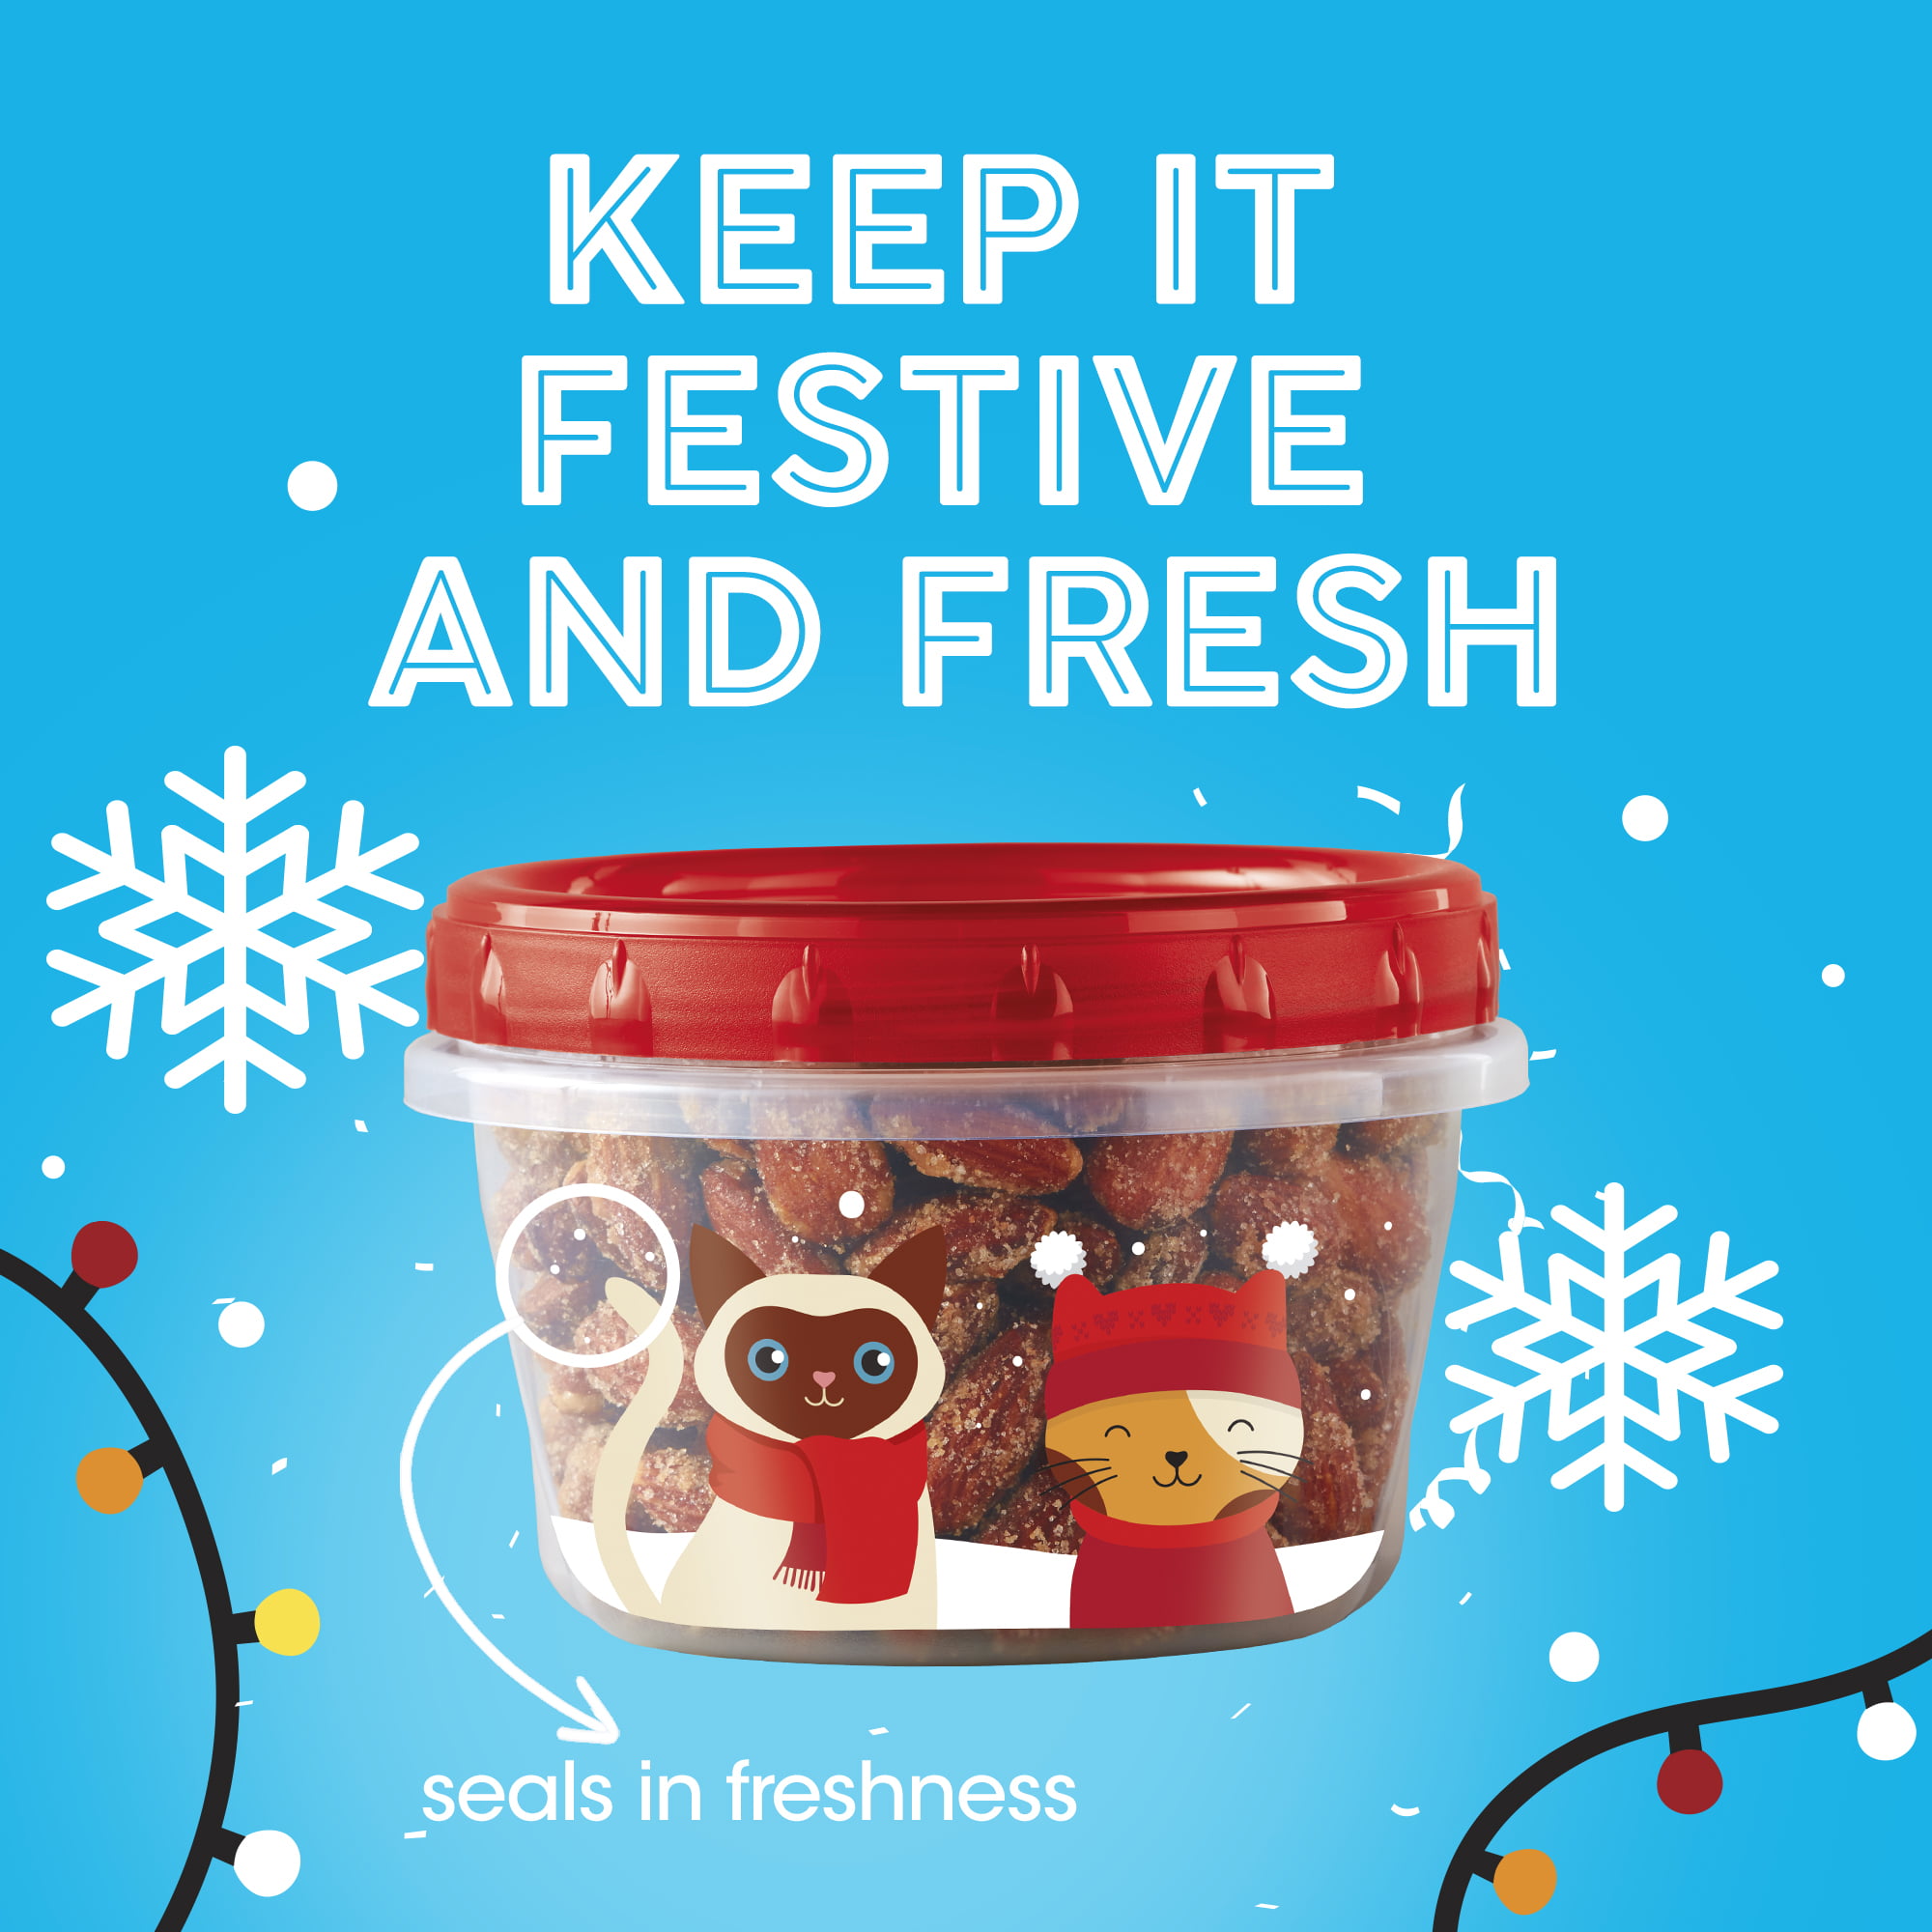 Ziploc Limited Edition Holiday Design Small Round Containers & Lids - 3  Pack, 1 pt - Kroger